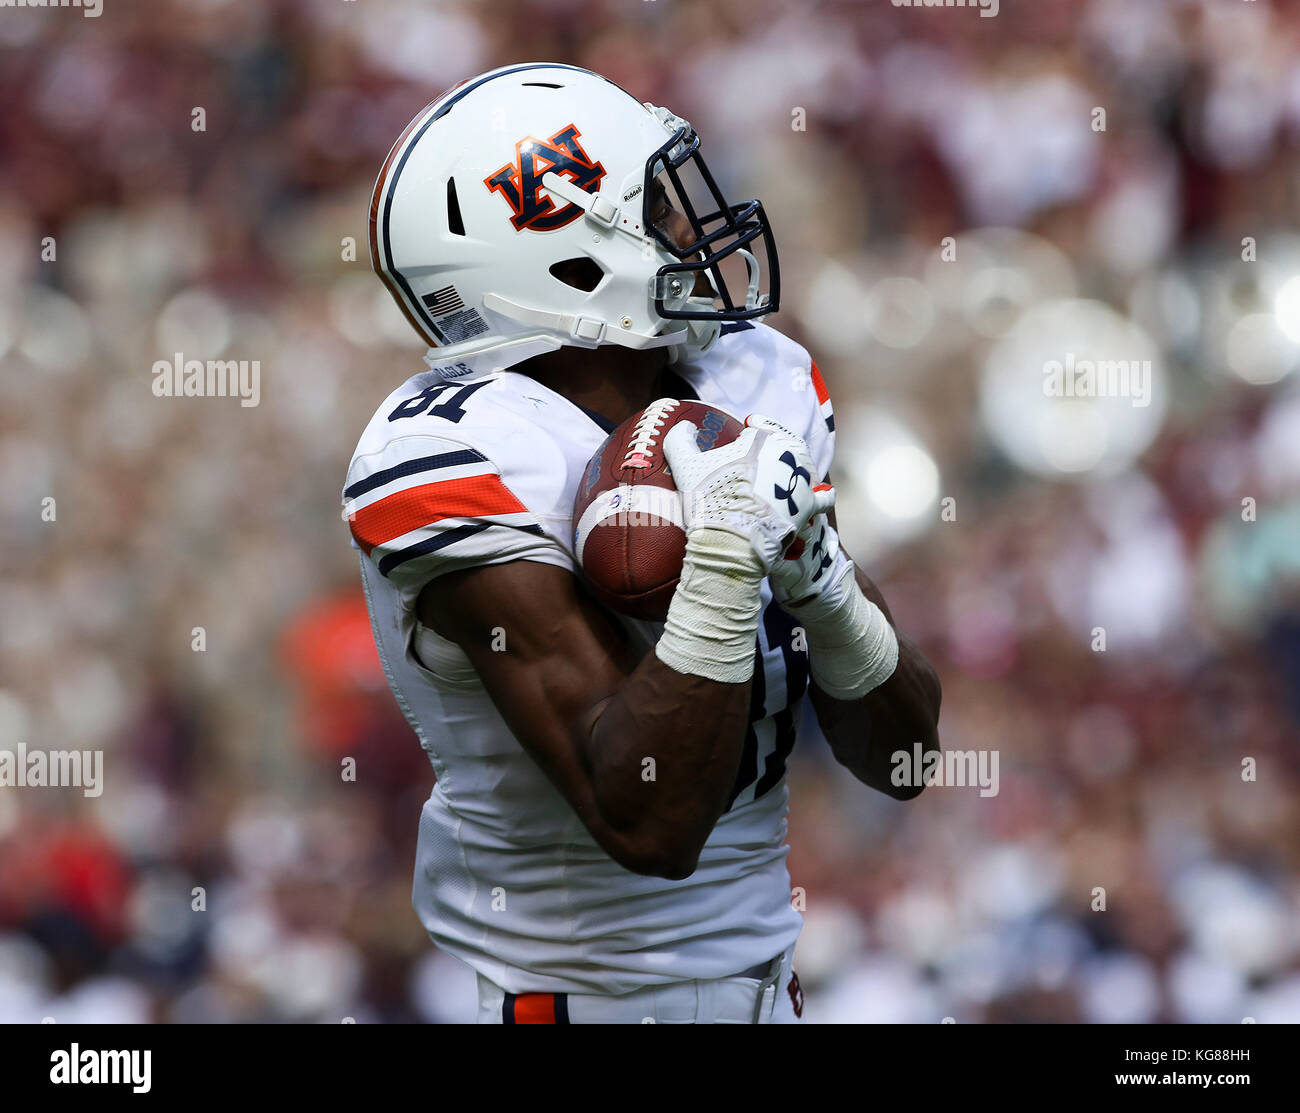 November 4, 2017: Auburn Tigers wide receiver Darius Slayton (81) catches a pass in the third quarter during the NCAA football game between the Auburn Tigers and the Texas A&M Aggies at Kyle Field in College Station, TX; John Glaser/CSM. Stock Photo